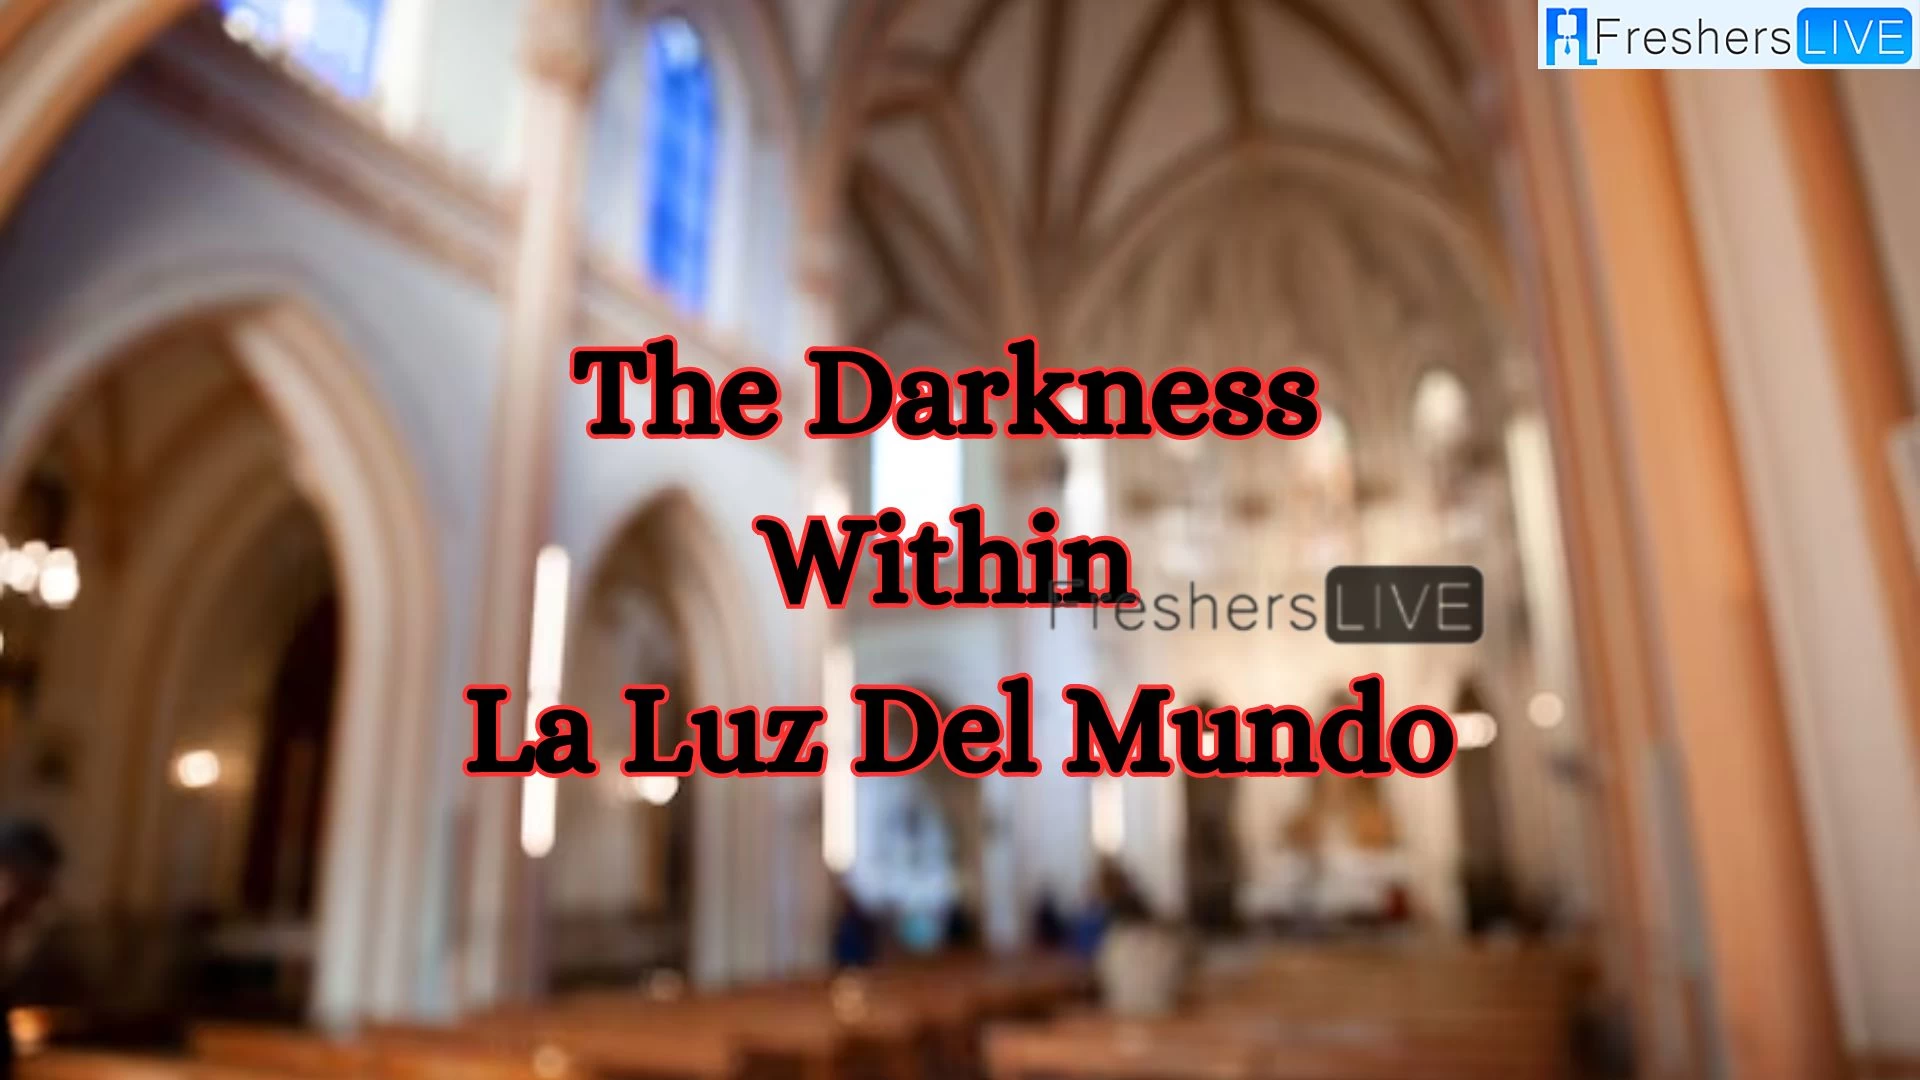 Is The Darkness Within La Luz Del Mundo Based on a True Story?